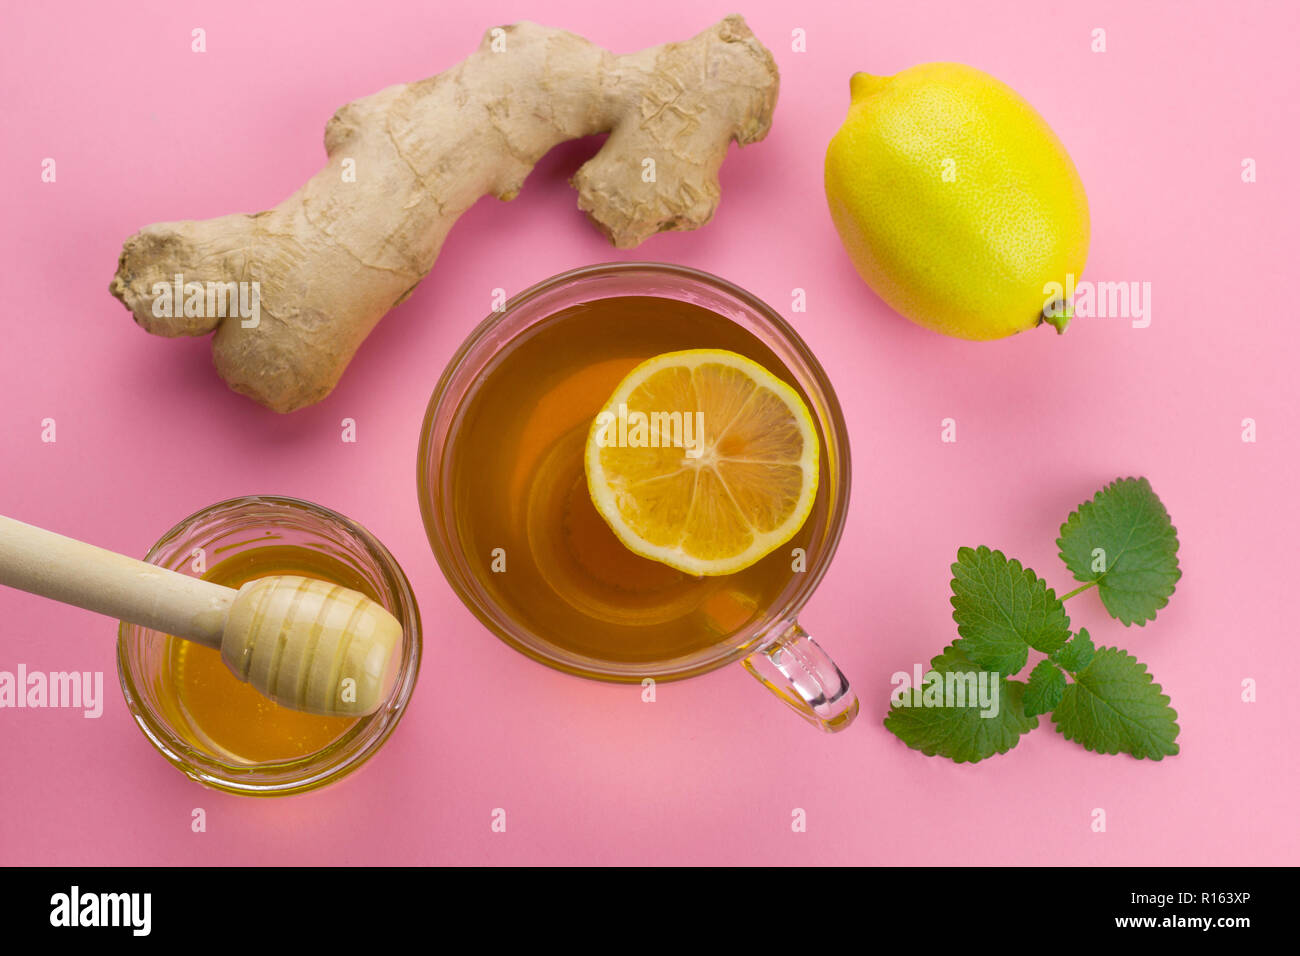 top view tea,  lemon,ginger, mint   and liquid honey jar with wooden spoon on a pink vibrant background healthy anti cold drink alternative medicine Stock Photo